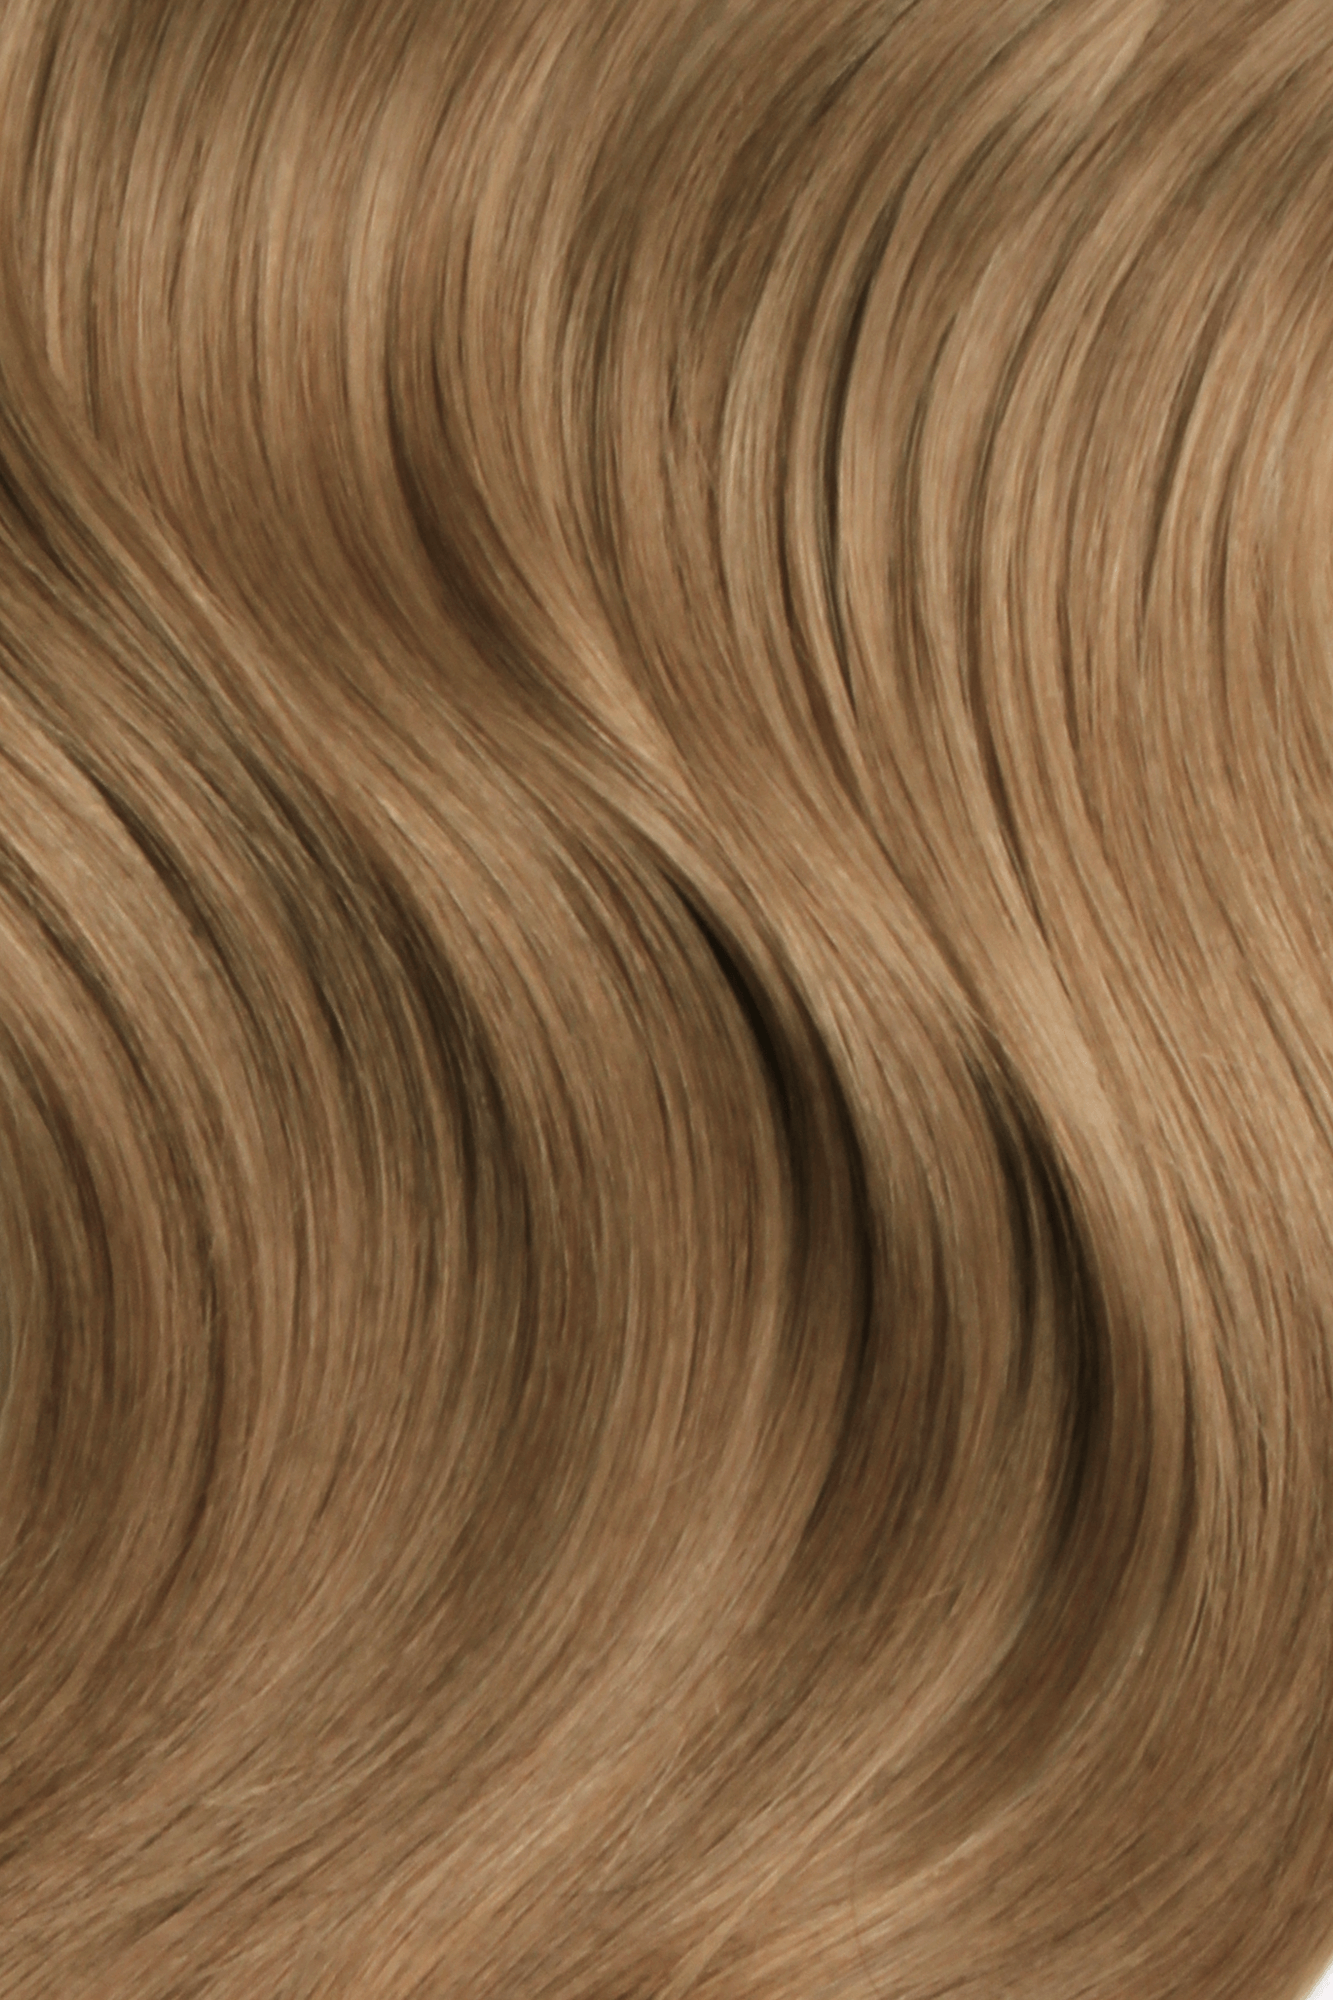 Nano Bonds 24 Inches - SWAY Hair Extensions Sunkissed-Brown-8-10 Ultra-fine, invisible bonds for a flawless, natural look. 100% Remy Human hair, lightweight and versatile. Reusable and perfect for individual or salon use.